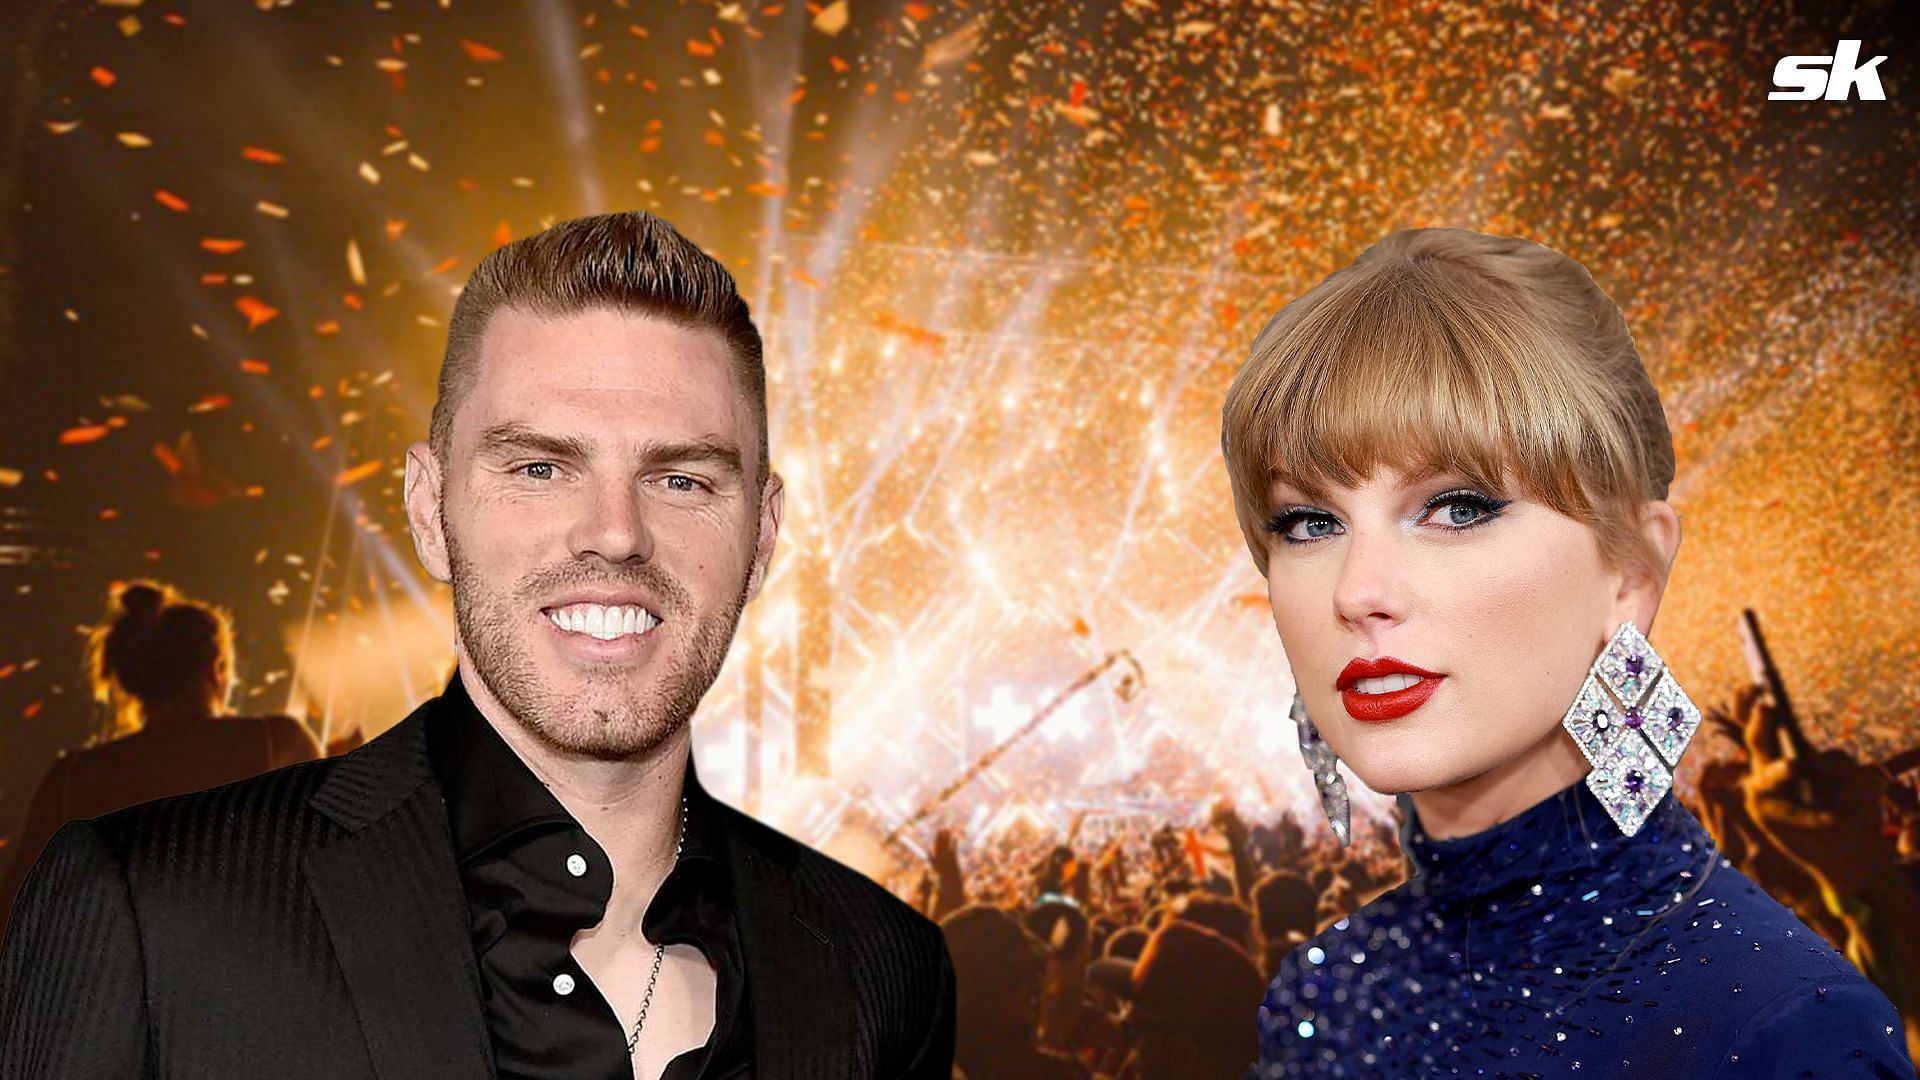 Freddie Freeman: Freddie Freeman and fellow Dodgers teammates disclose  Taylor Swift song picks, fans erupt: The dance to 'Shake It Off' has me